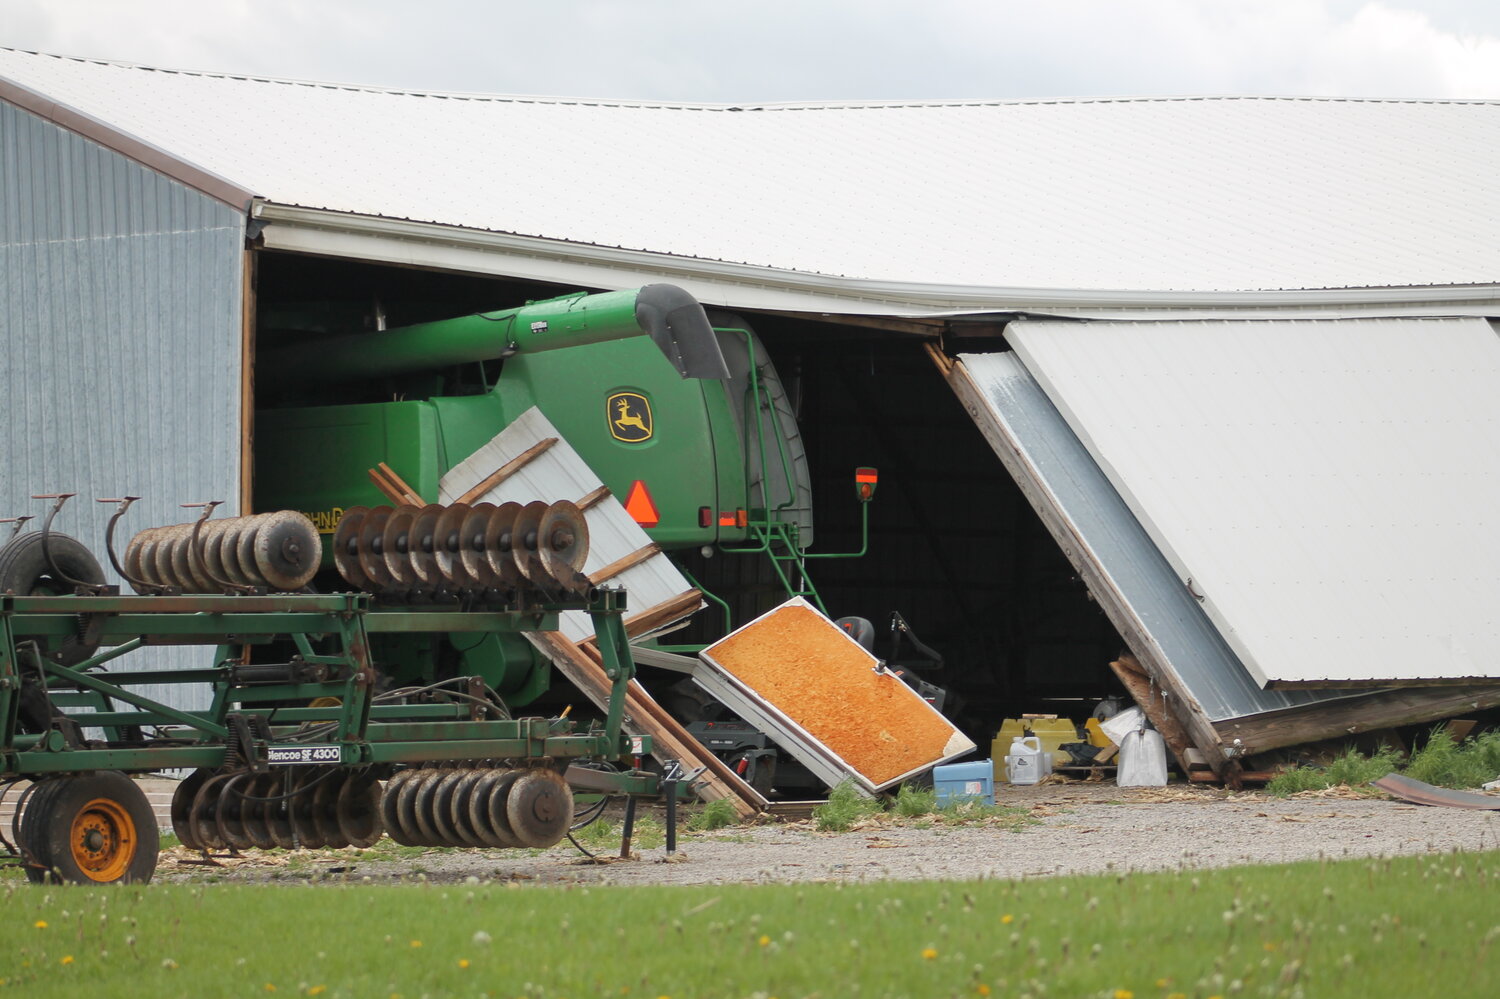 A machine shed at the Tracy Madsen farm in between Atalissa and West Liberty was damaged by the storm Sunday evening.